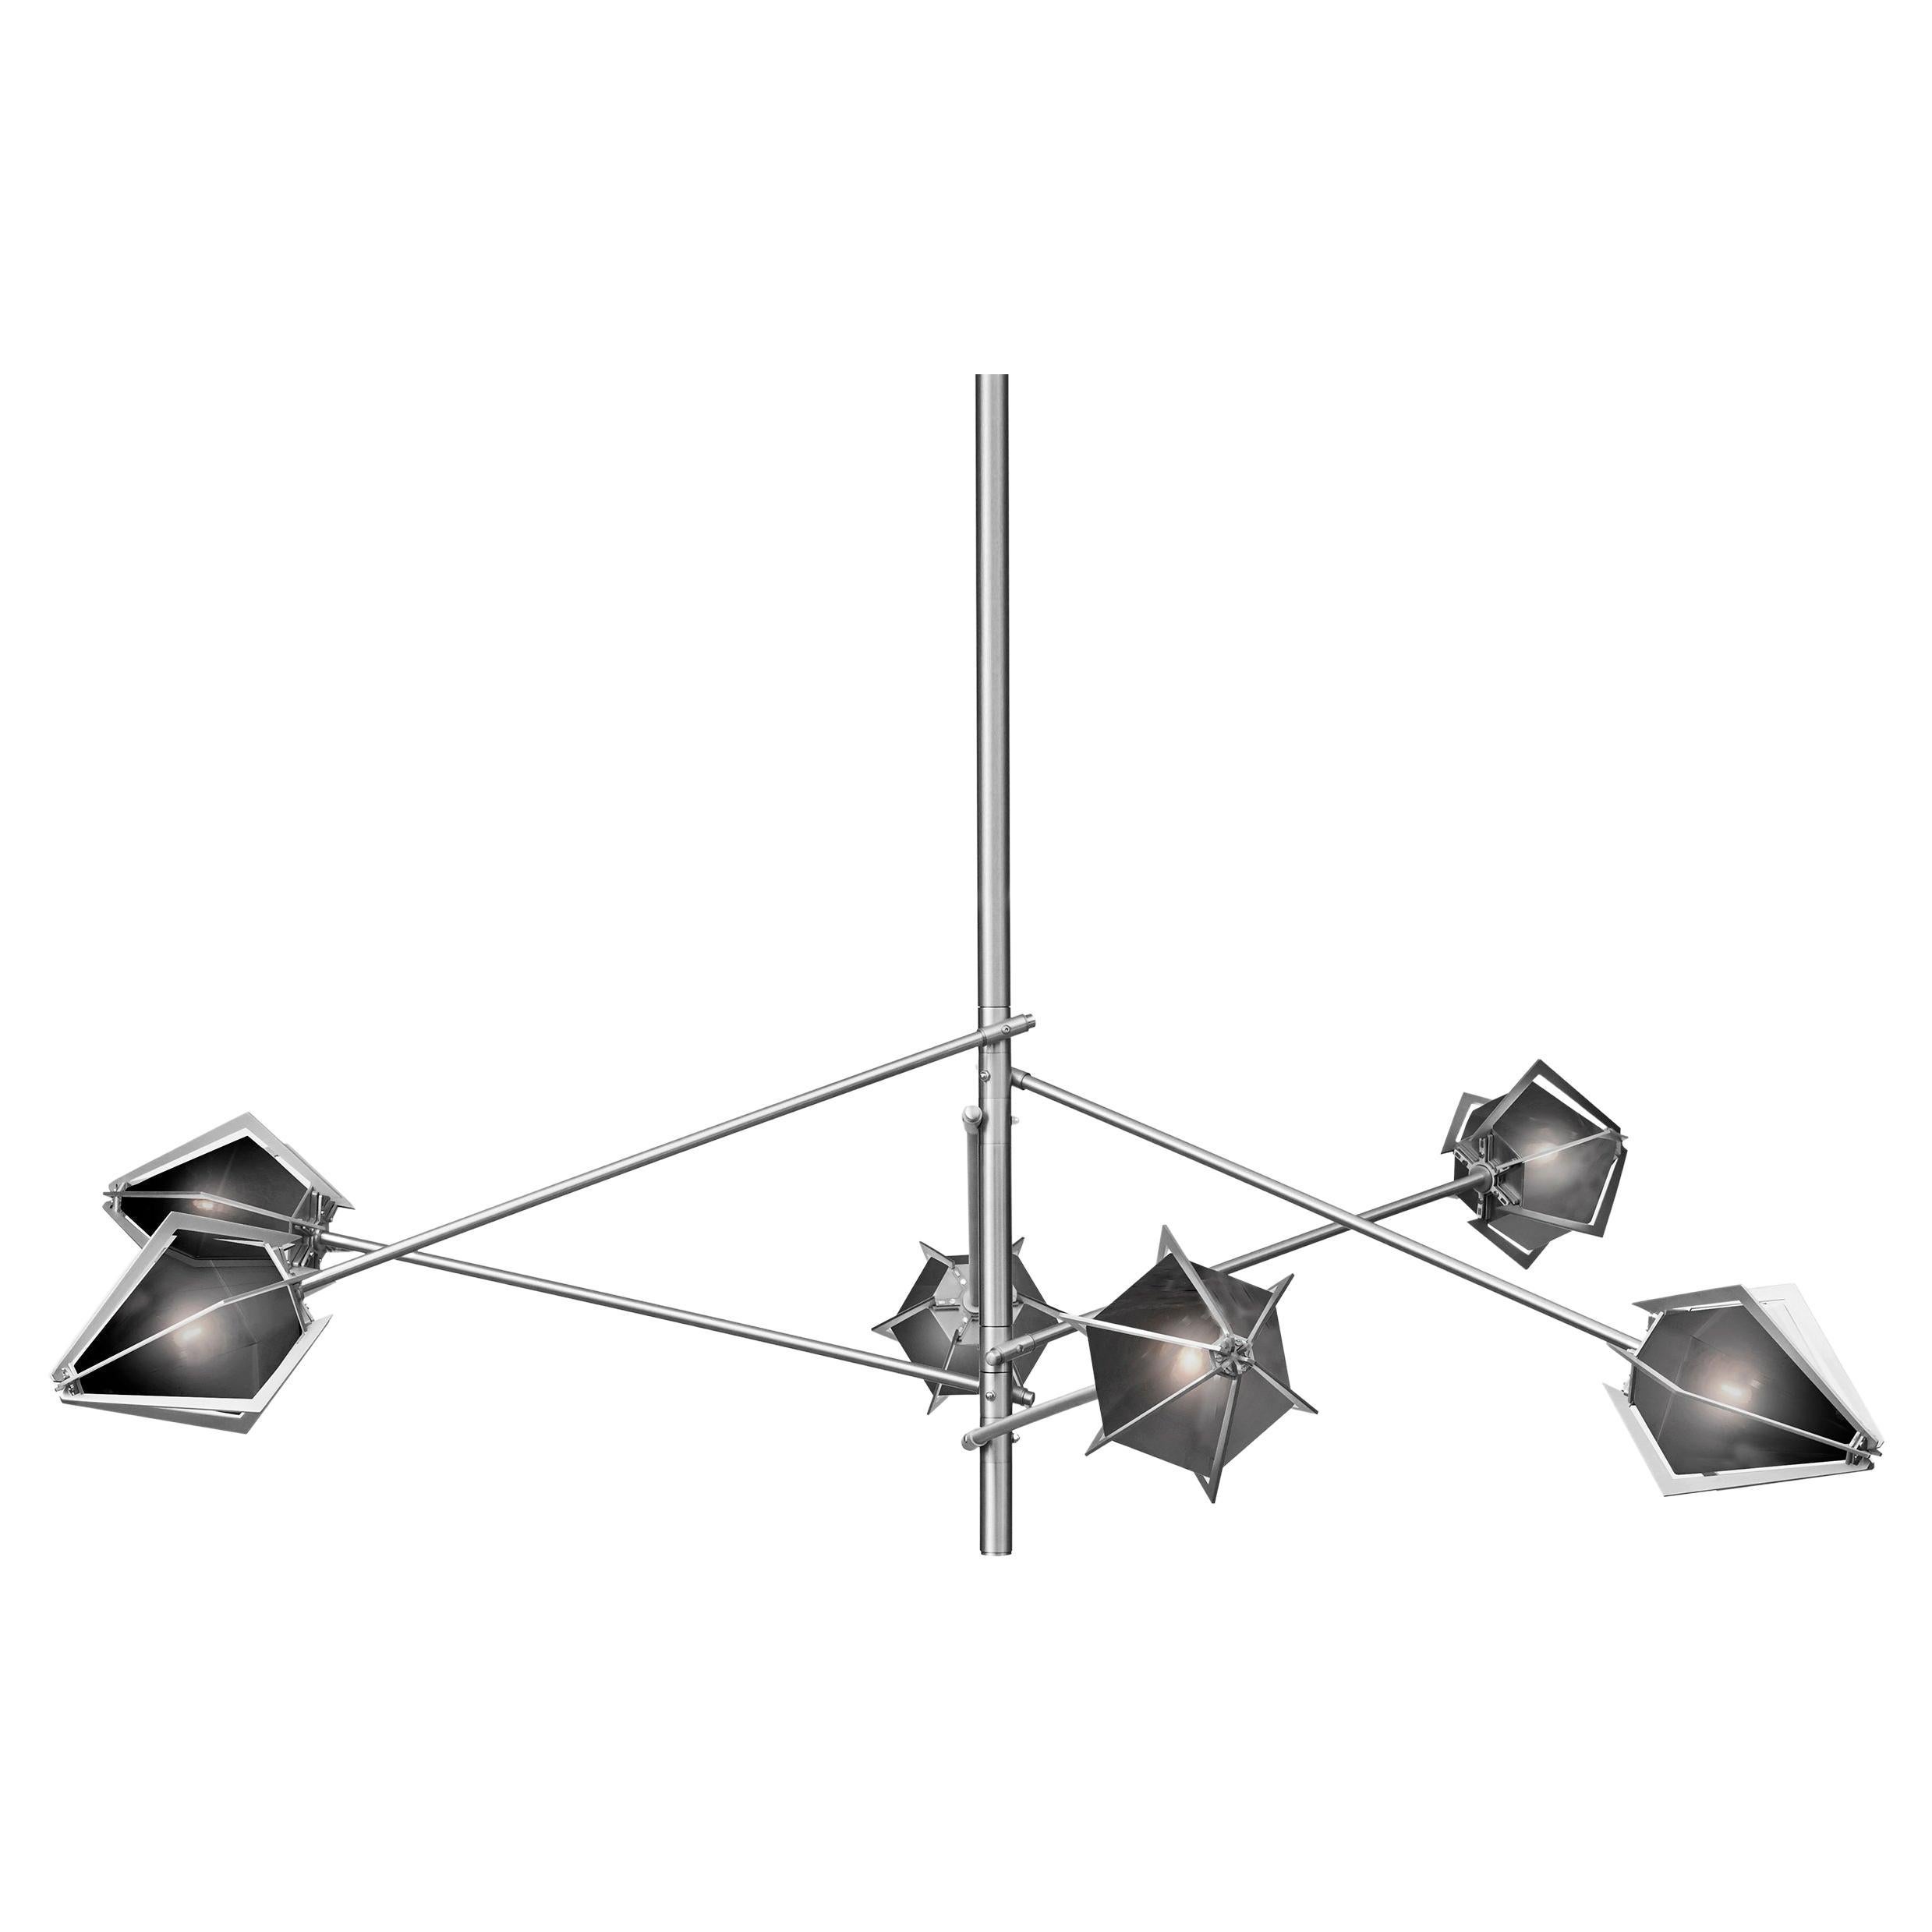 Harlow Spoke Chandelier Large in Satin Nickel and Smoked Gray Glass